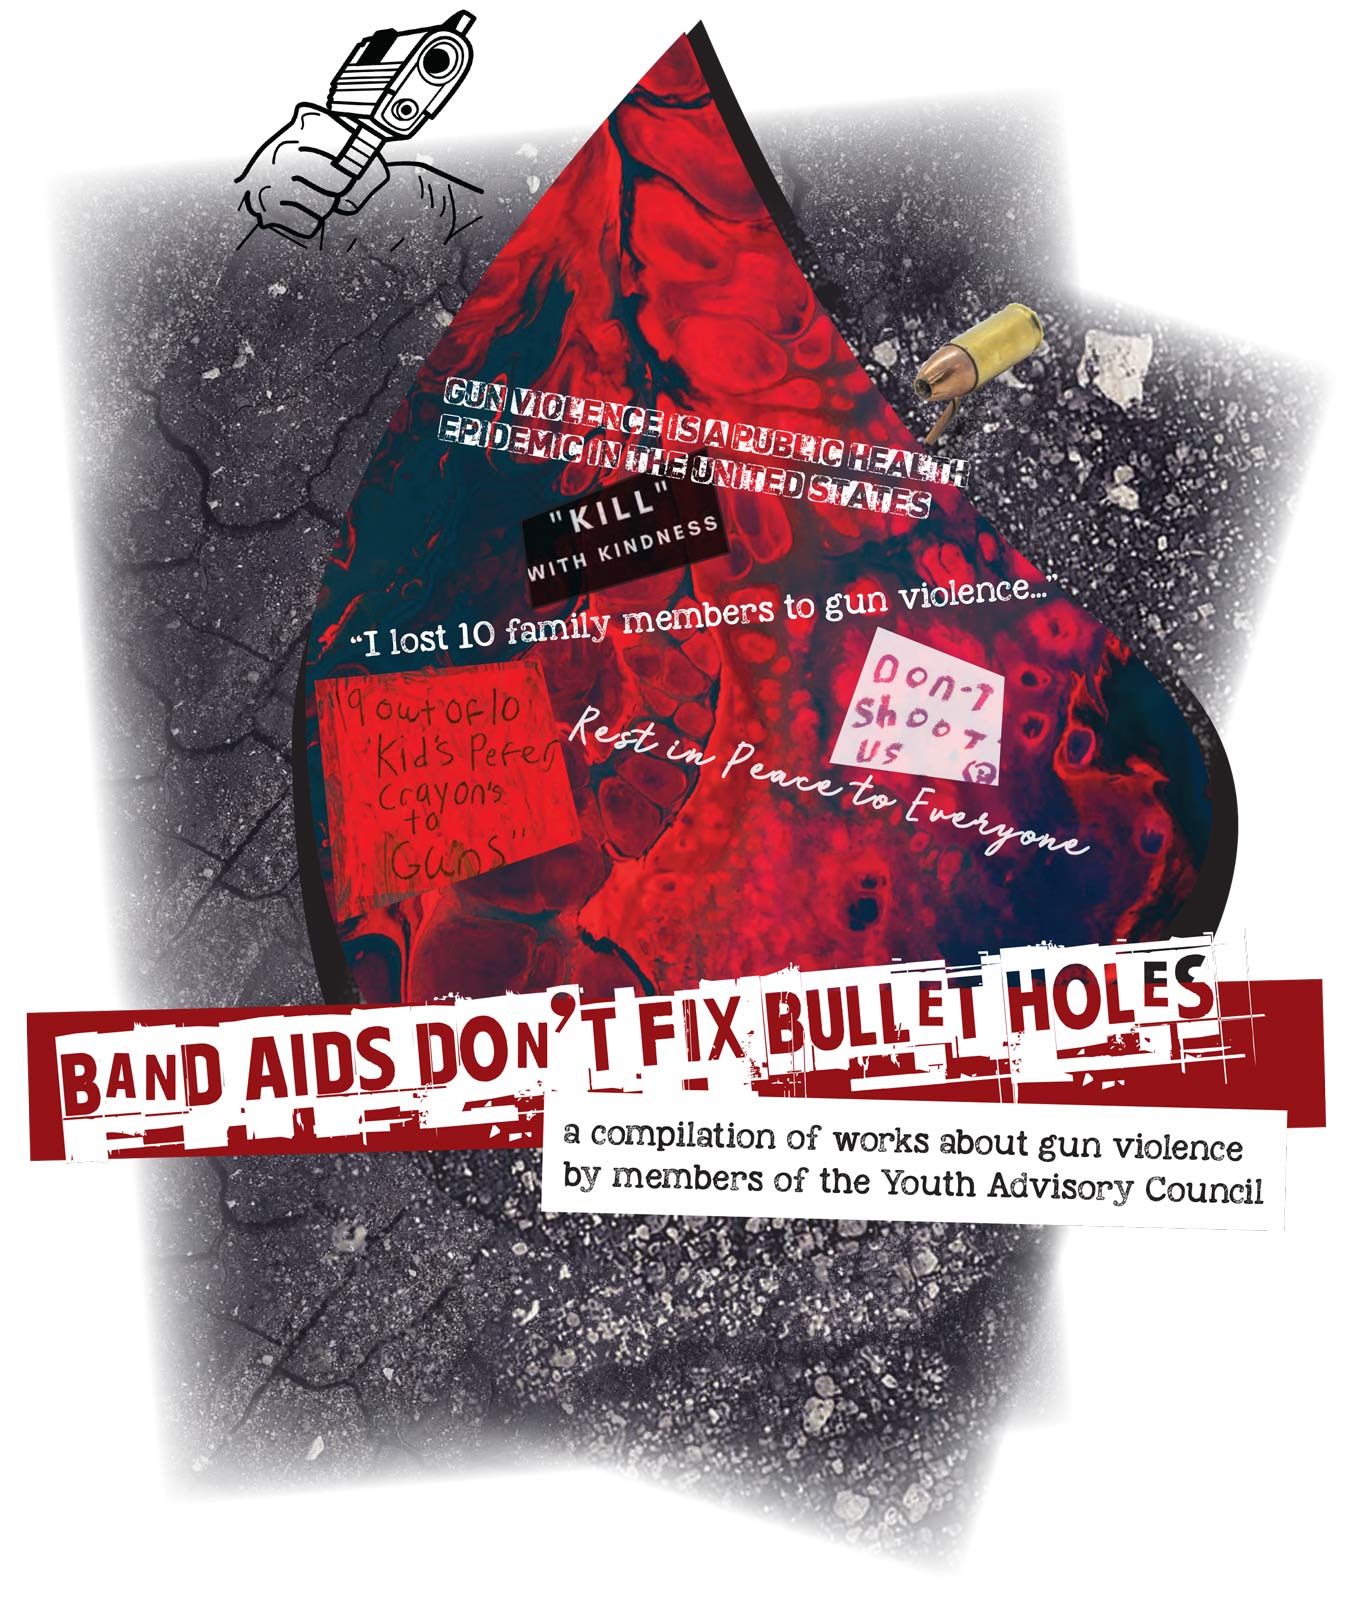 Page 1 of Band Aids Don't Fix Bullet Holes is a montage of images and text